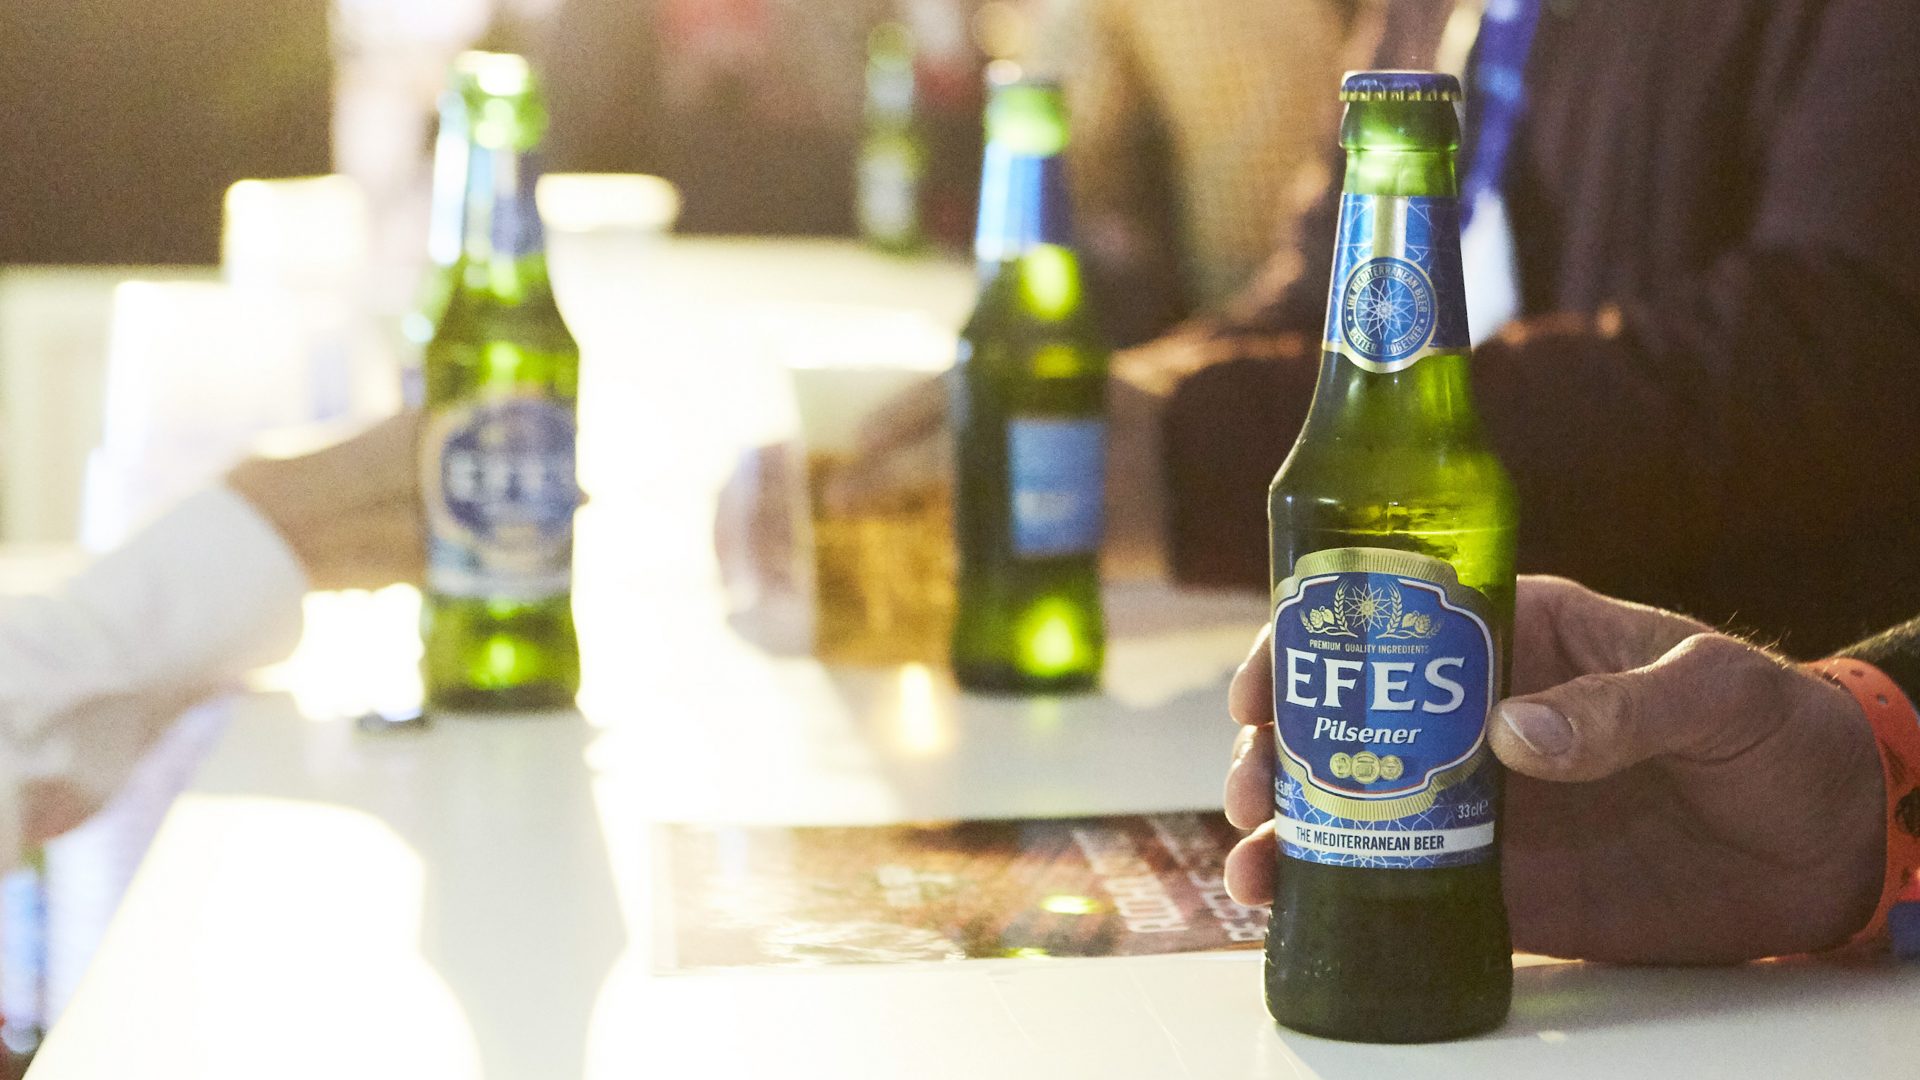 Efes beer - sponsor of Euroleague Basketball Final Four in Vitoria